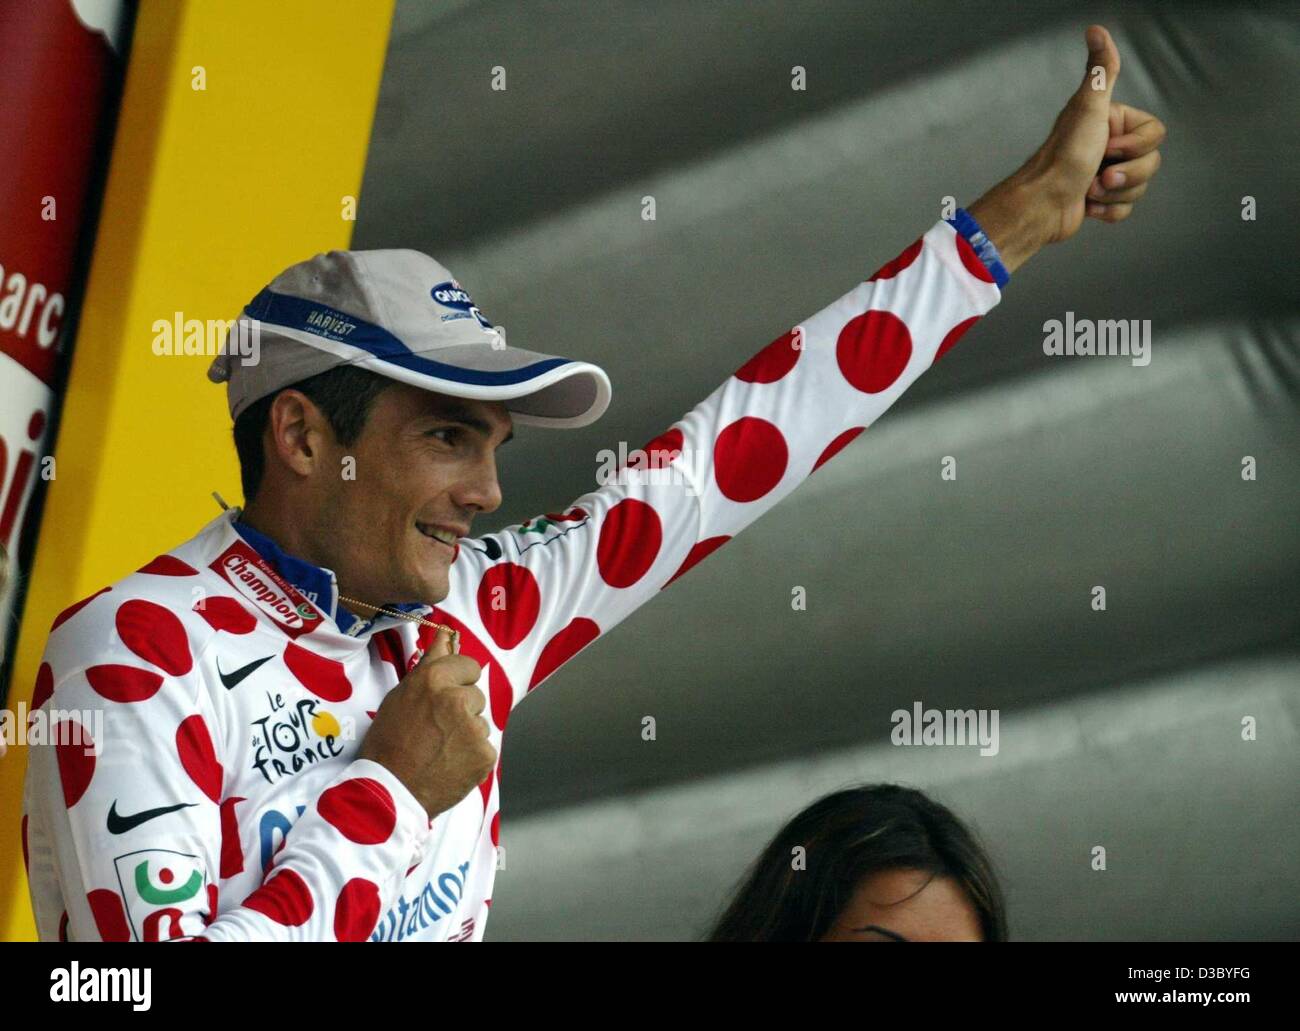 (dpa) - French Richard Virenque of Quick Step-Davitamon shows off the best climber's white and red dotted points jersey on the podium after the individual time trial of the 19th stage of the 2003 Tour de France cycling race in Nantes, France, 26 July 2003. The 19th stage was a 49km long individual t Stock Photo